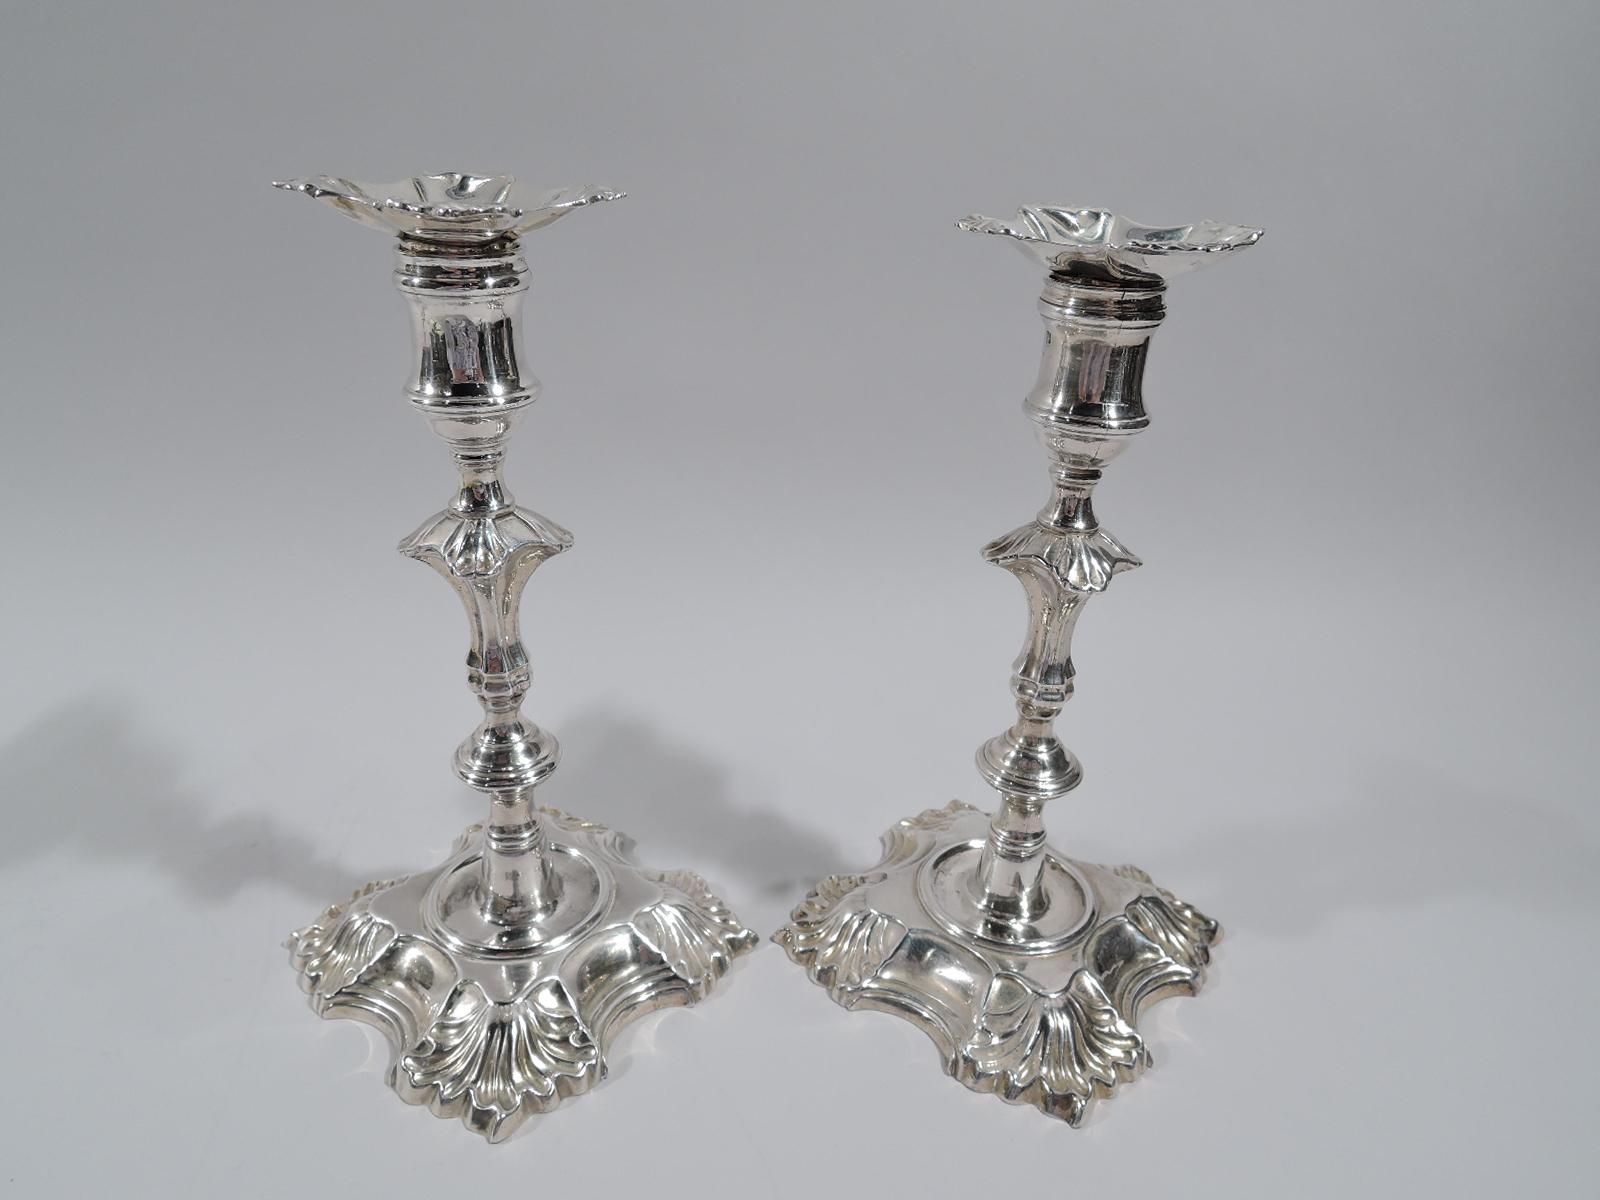 Set of 4 George II cast sterling silver candlesticks. Made by John Cafe in London in 1748. Each: Knopped shaft with leaf flange mounted to inset circle in scroll and leaf quadrilateral foot. Spool socket. Bobeche lobed detachable with leaf corners.